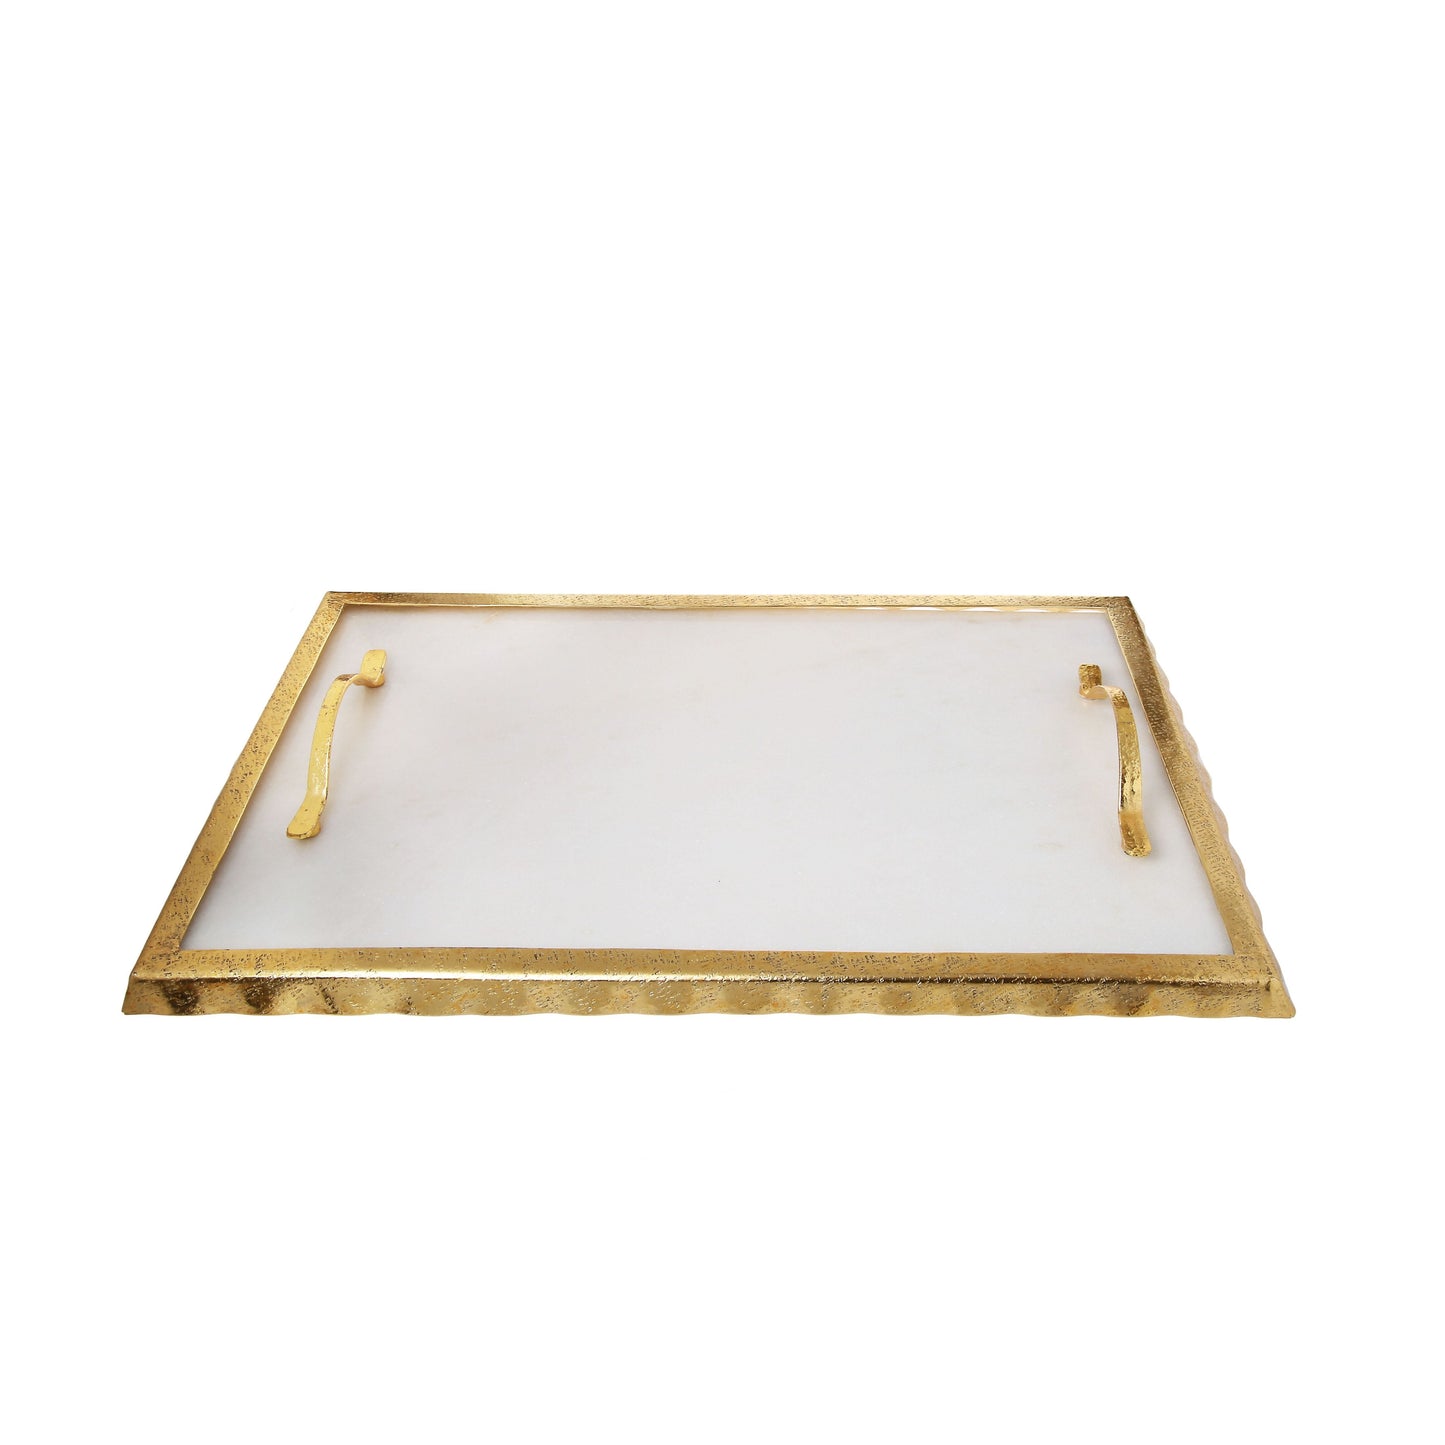 Classic Touch White Marble Challah Tray With Gold Rim And Handles, 11" x 18"